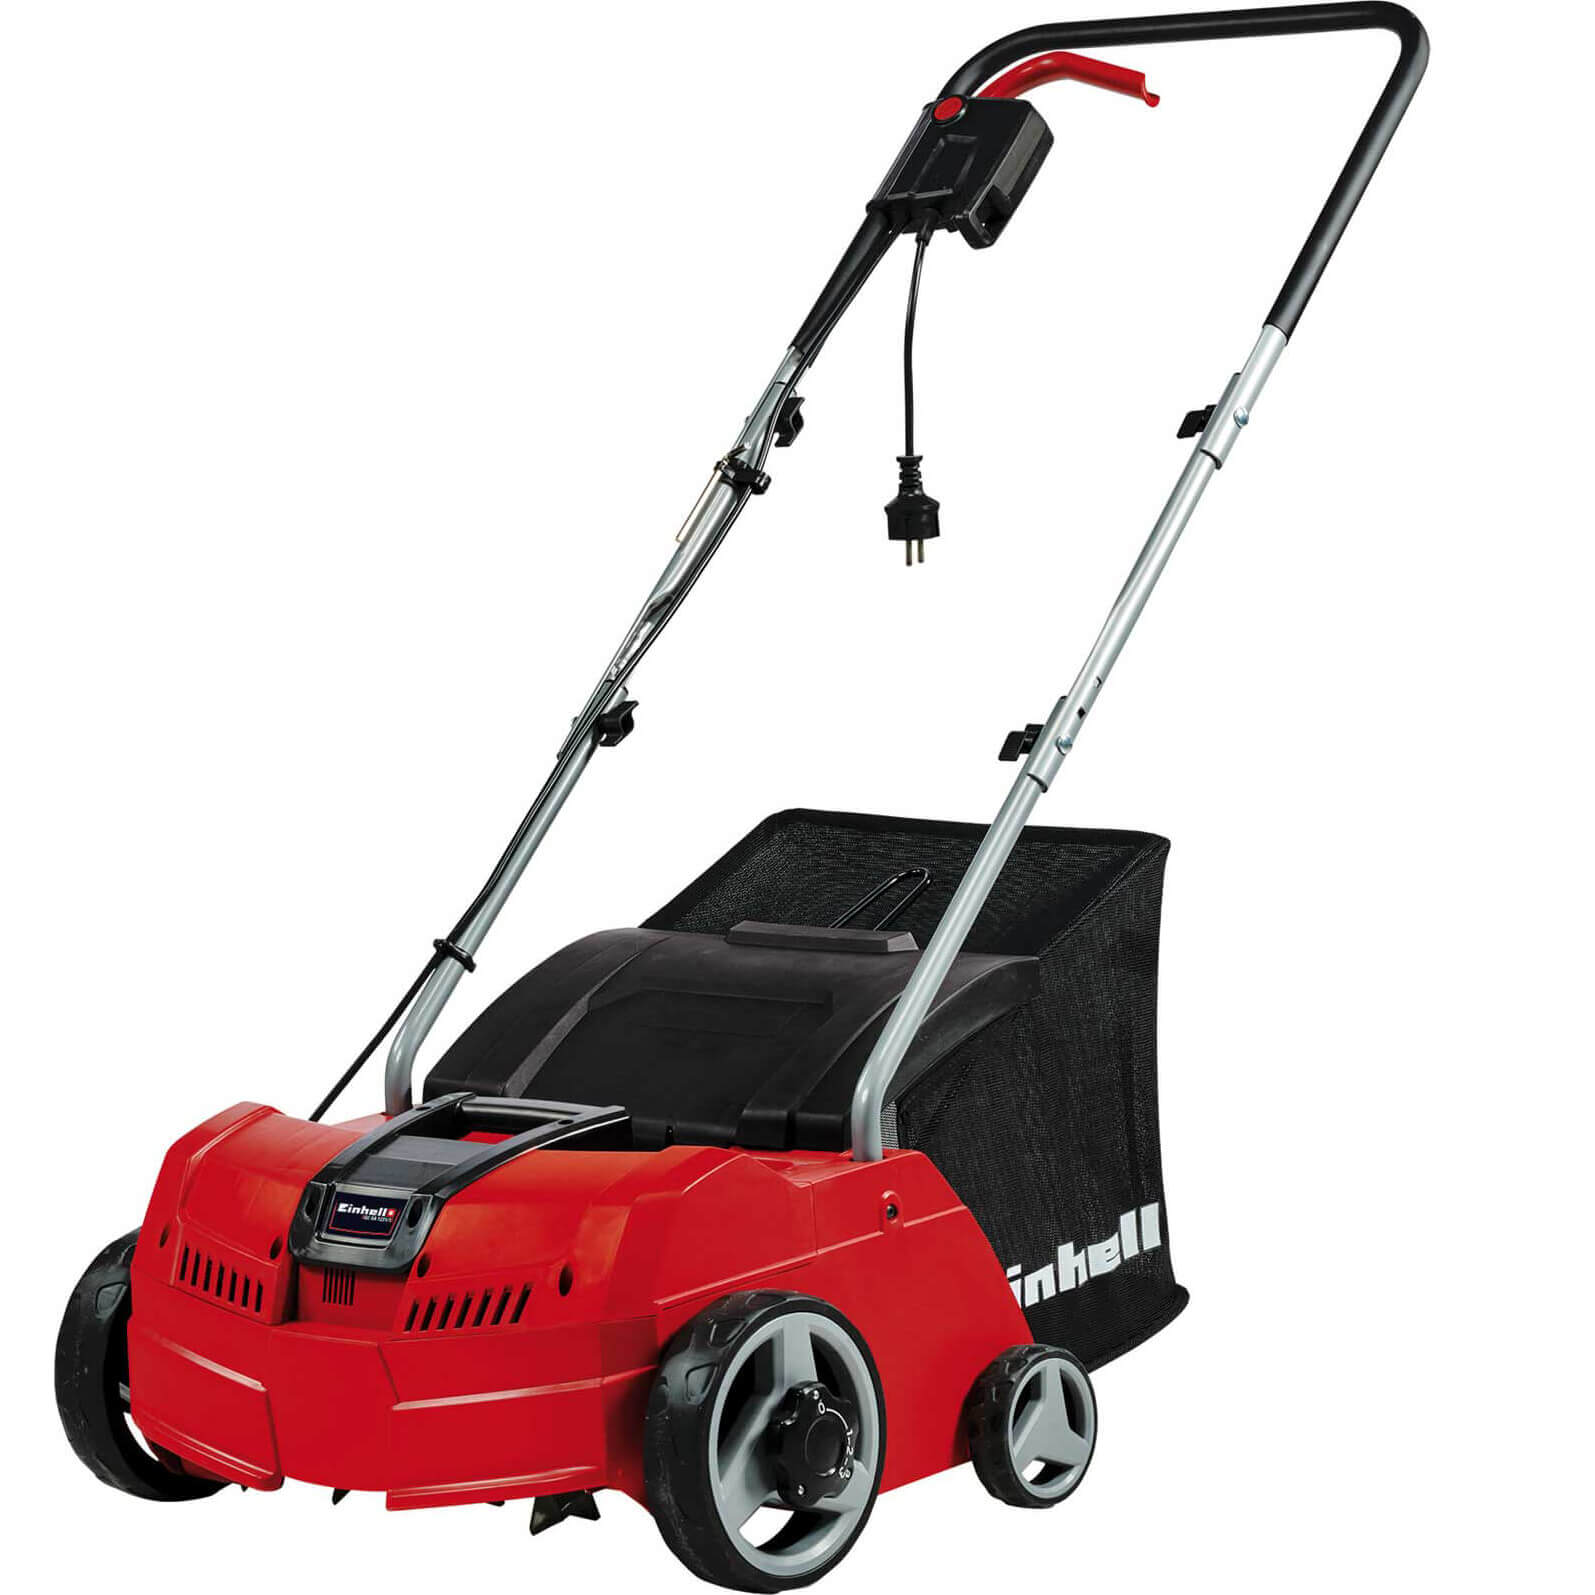 Einhell GC-SA 1231/1 2 in 1 Electric Lawnraker and Aerator 310mm